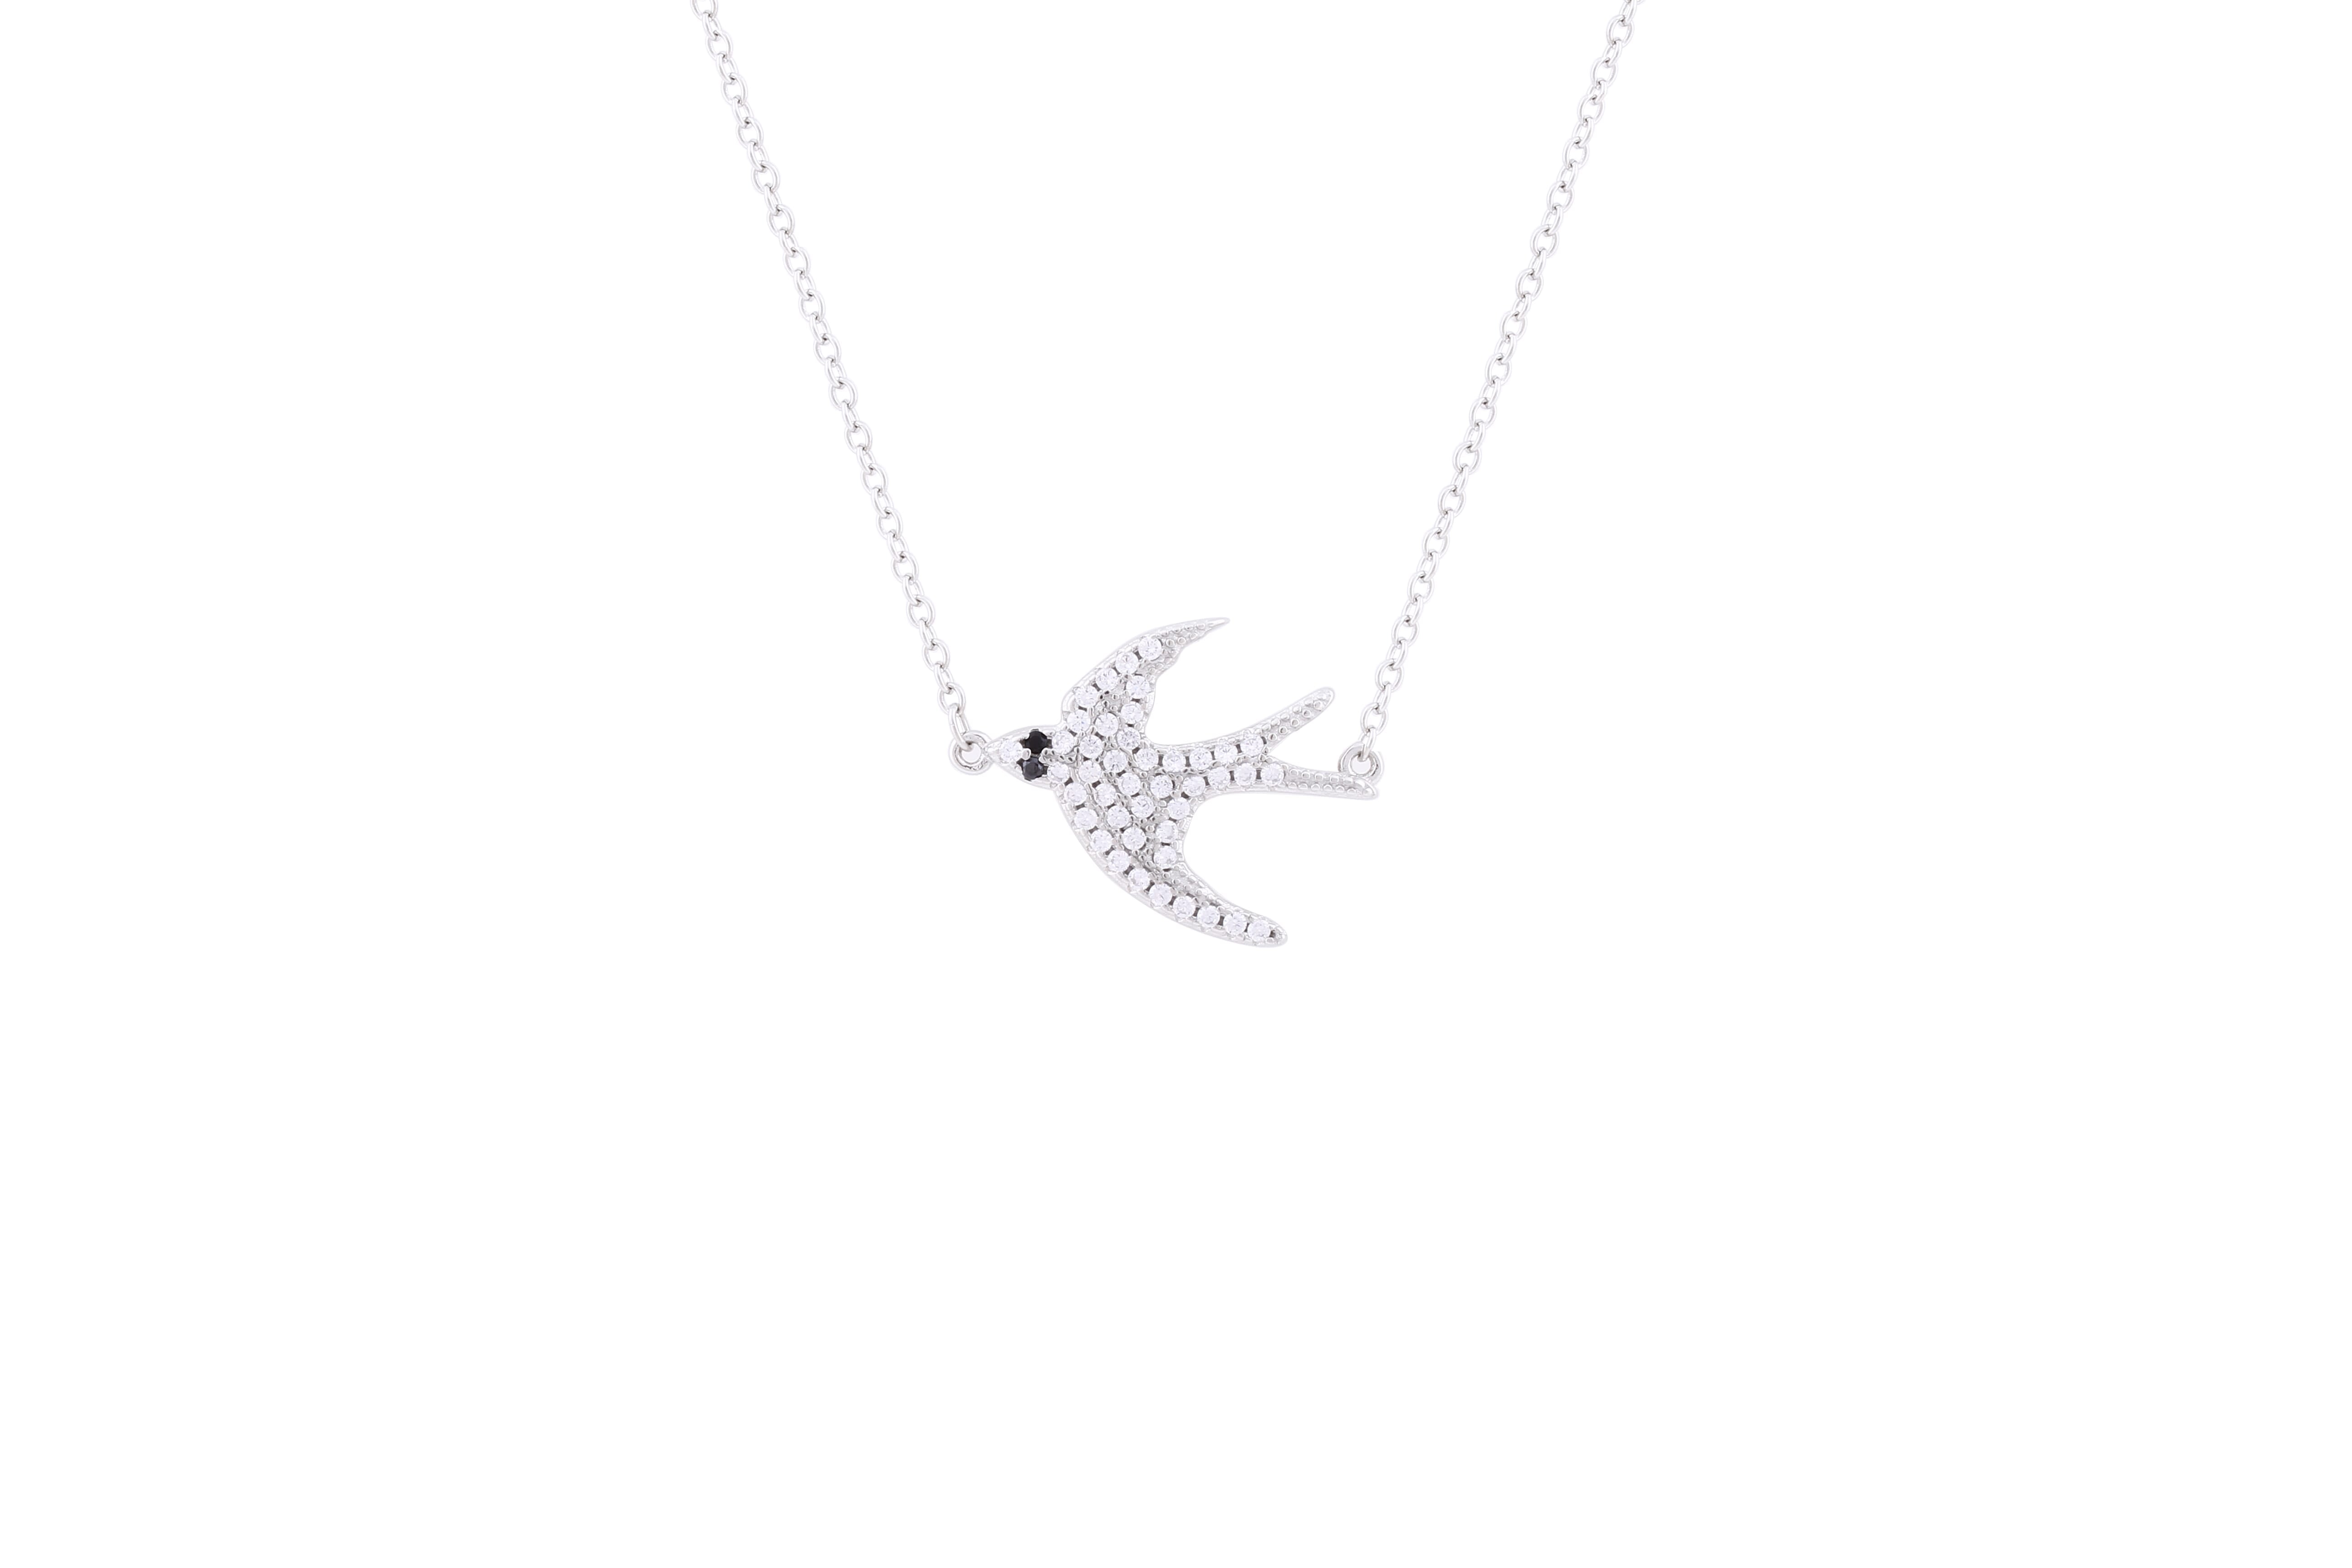 Asfour Sterling Silver Bird Necklace Inlaid With Zircon Stones ND0001